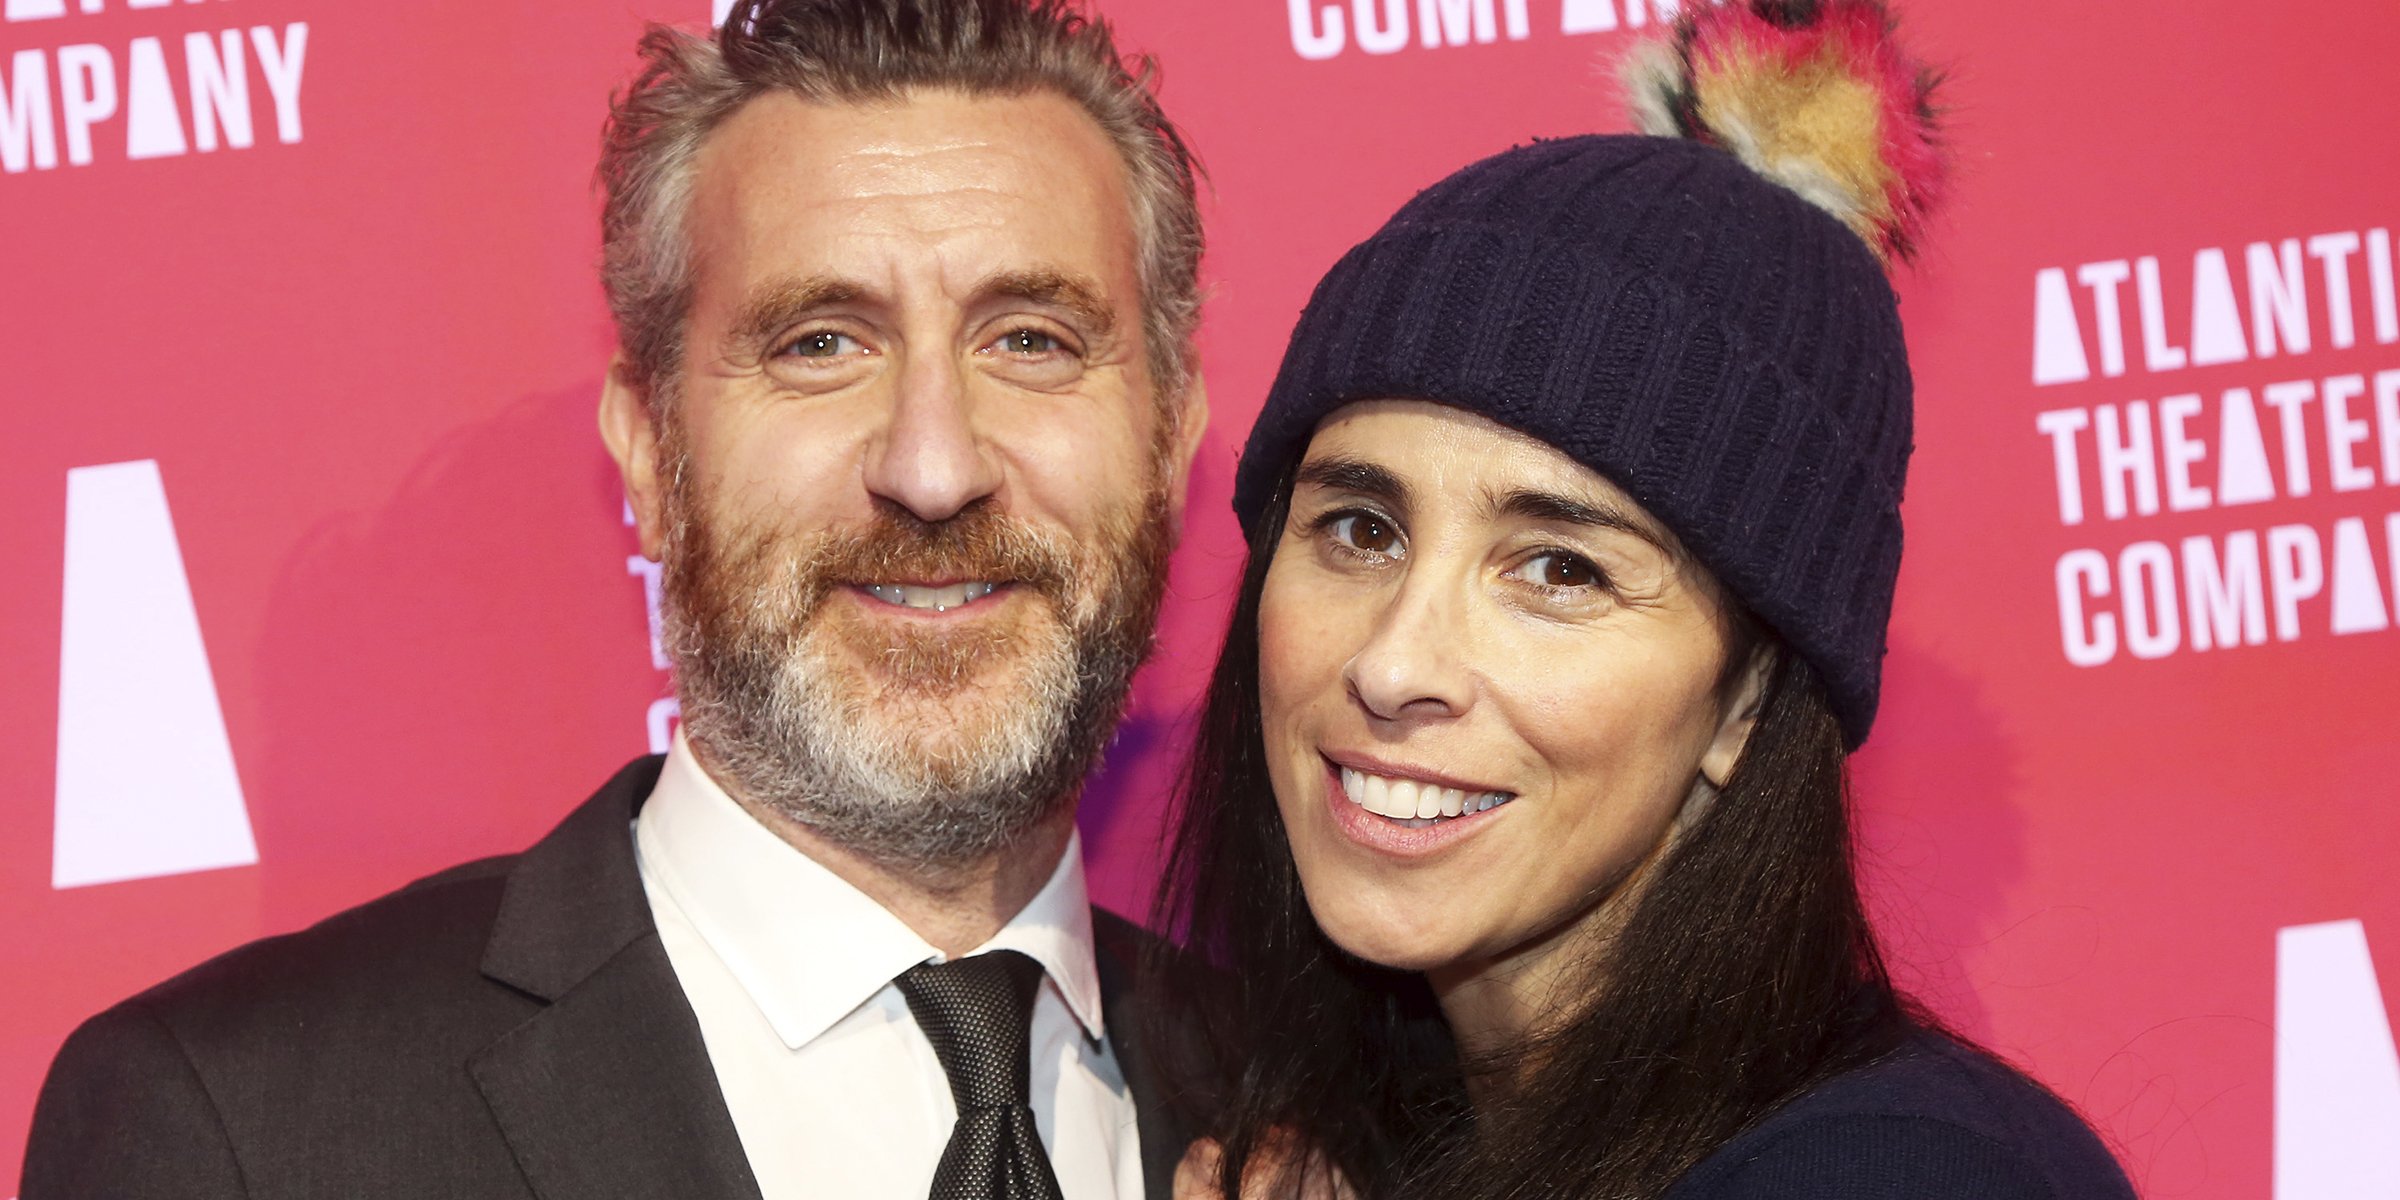 Rory Albanese and Sarah Silverman | Source: Getty Images